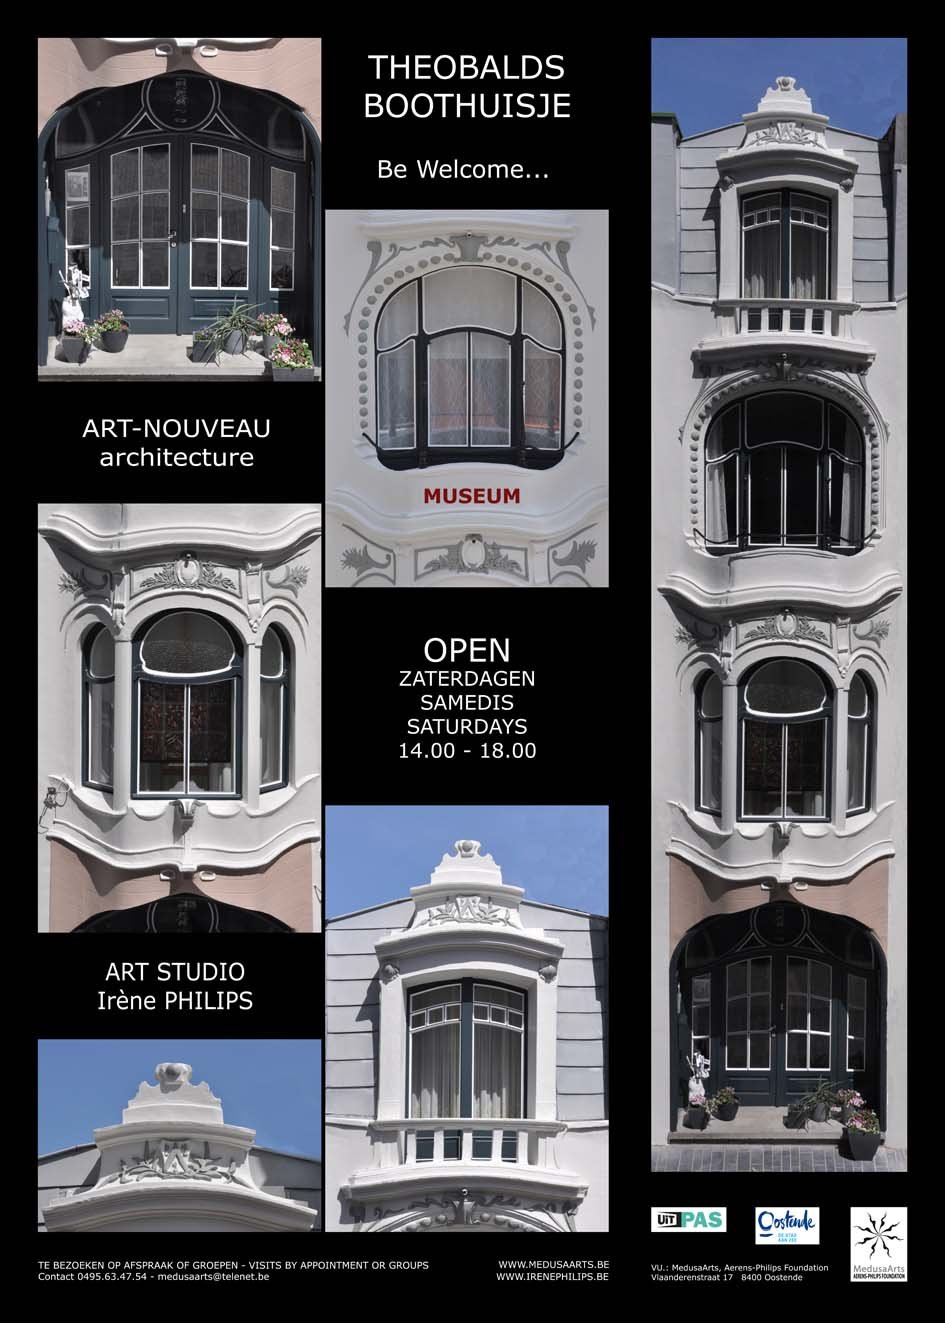 THEOBALDS BOOTHUISJE, Art-nouveau house in Ostend - MedusaArts, Aerens-Philips Foundation